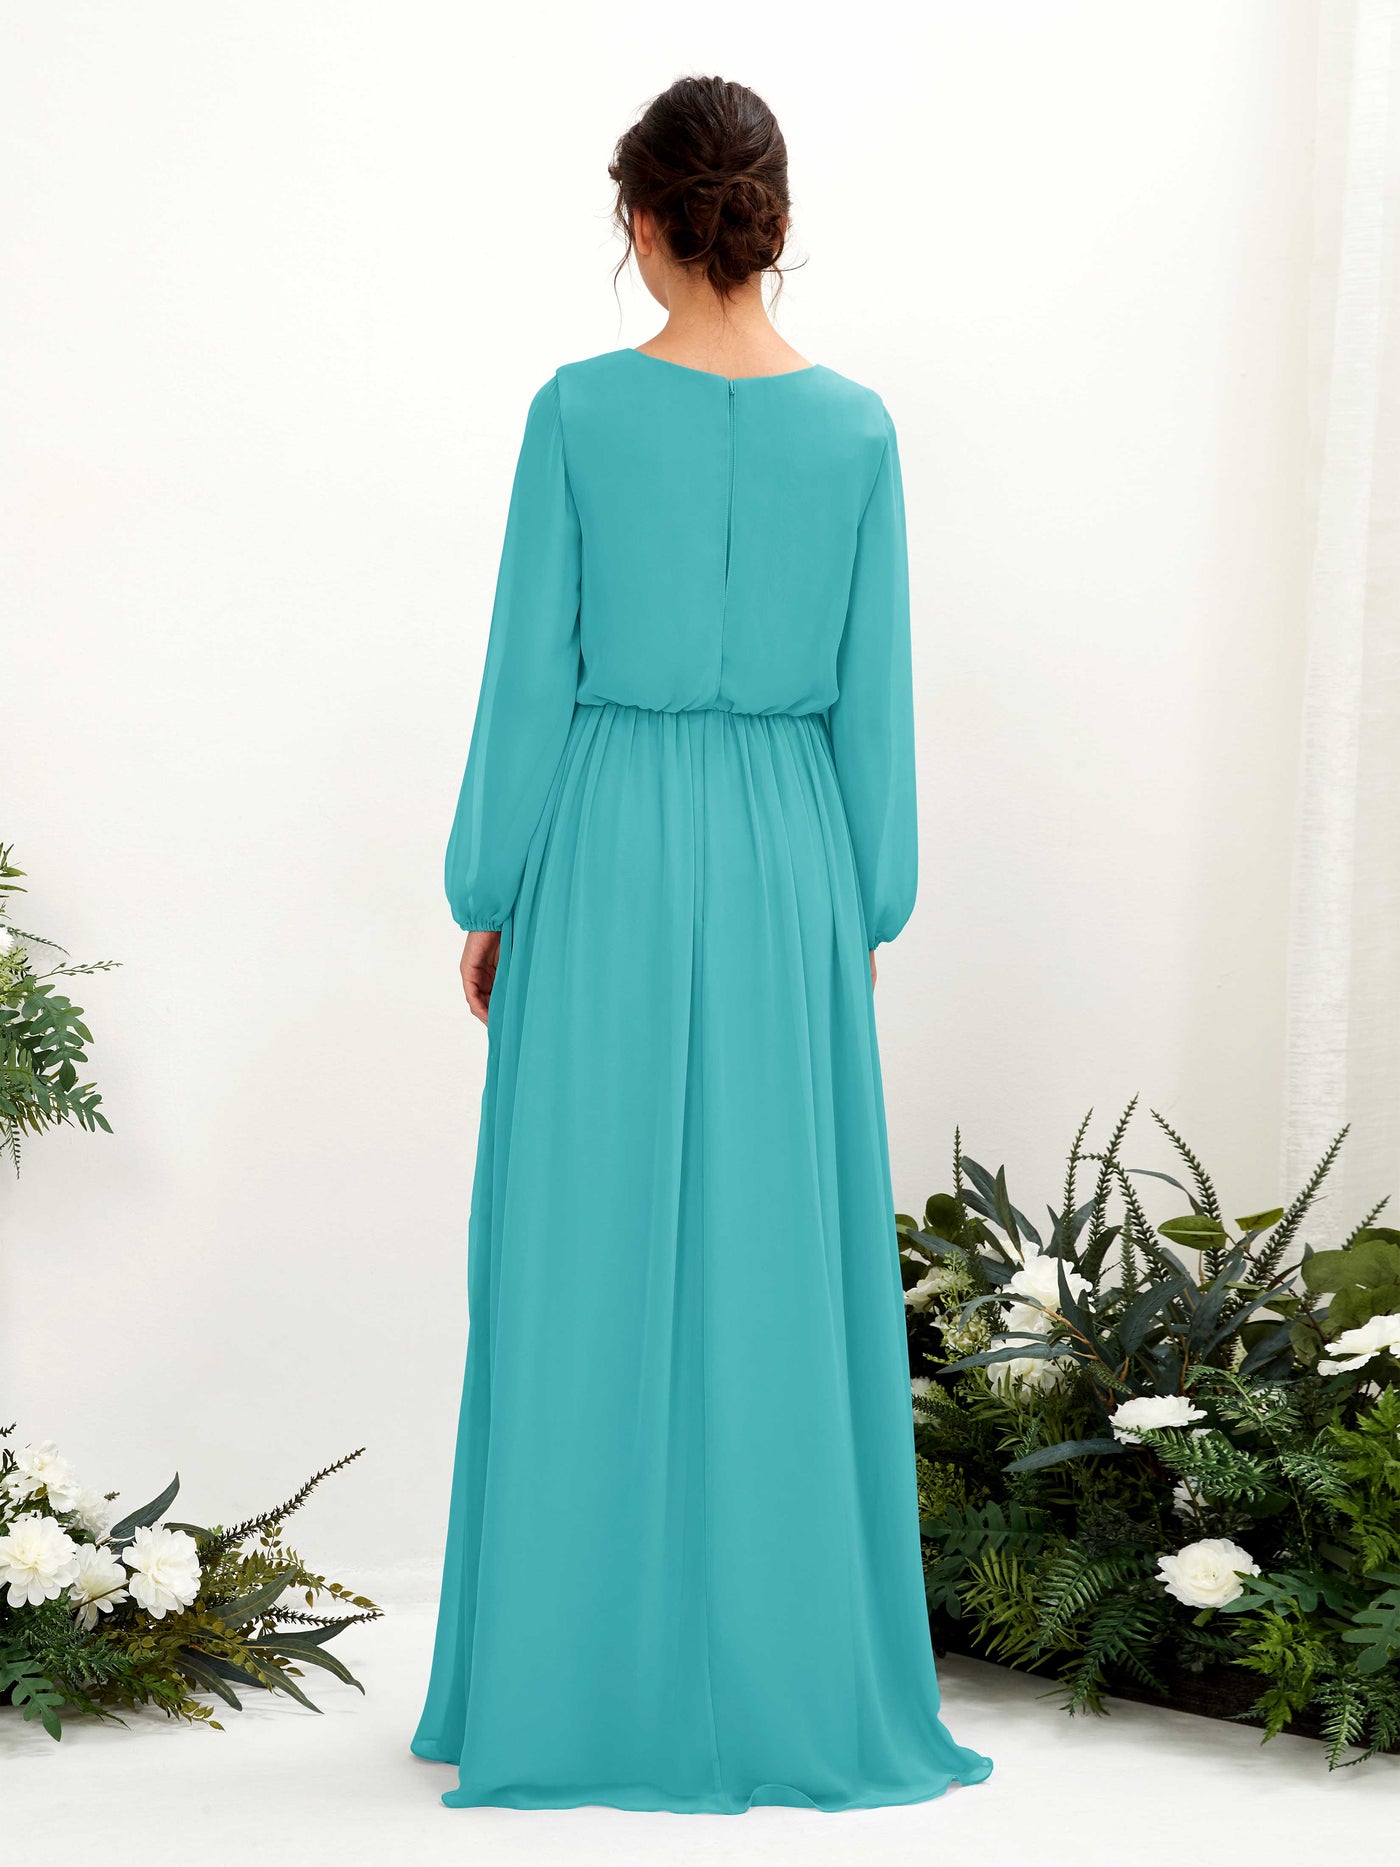 Turquoise Bridesmaid Dresses Bridesmaid Dress A-line Chiffon V-neck Full Length Long Sleeves Wedding Party Dress (81223823)#color_turquoise